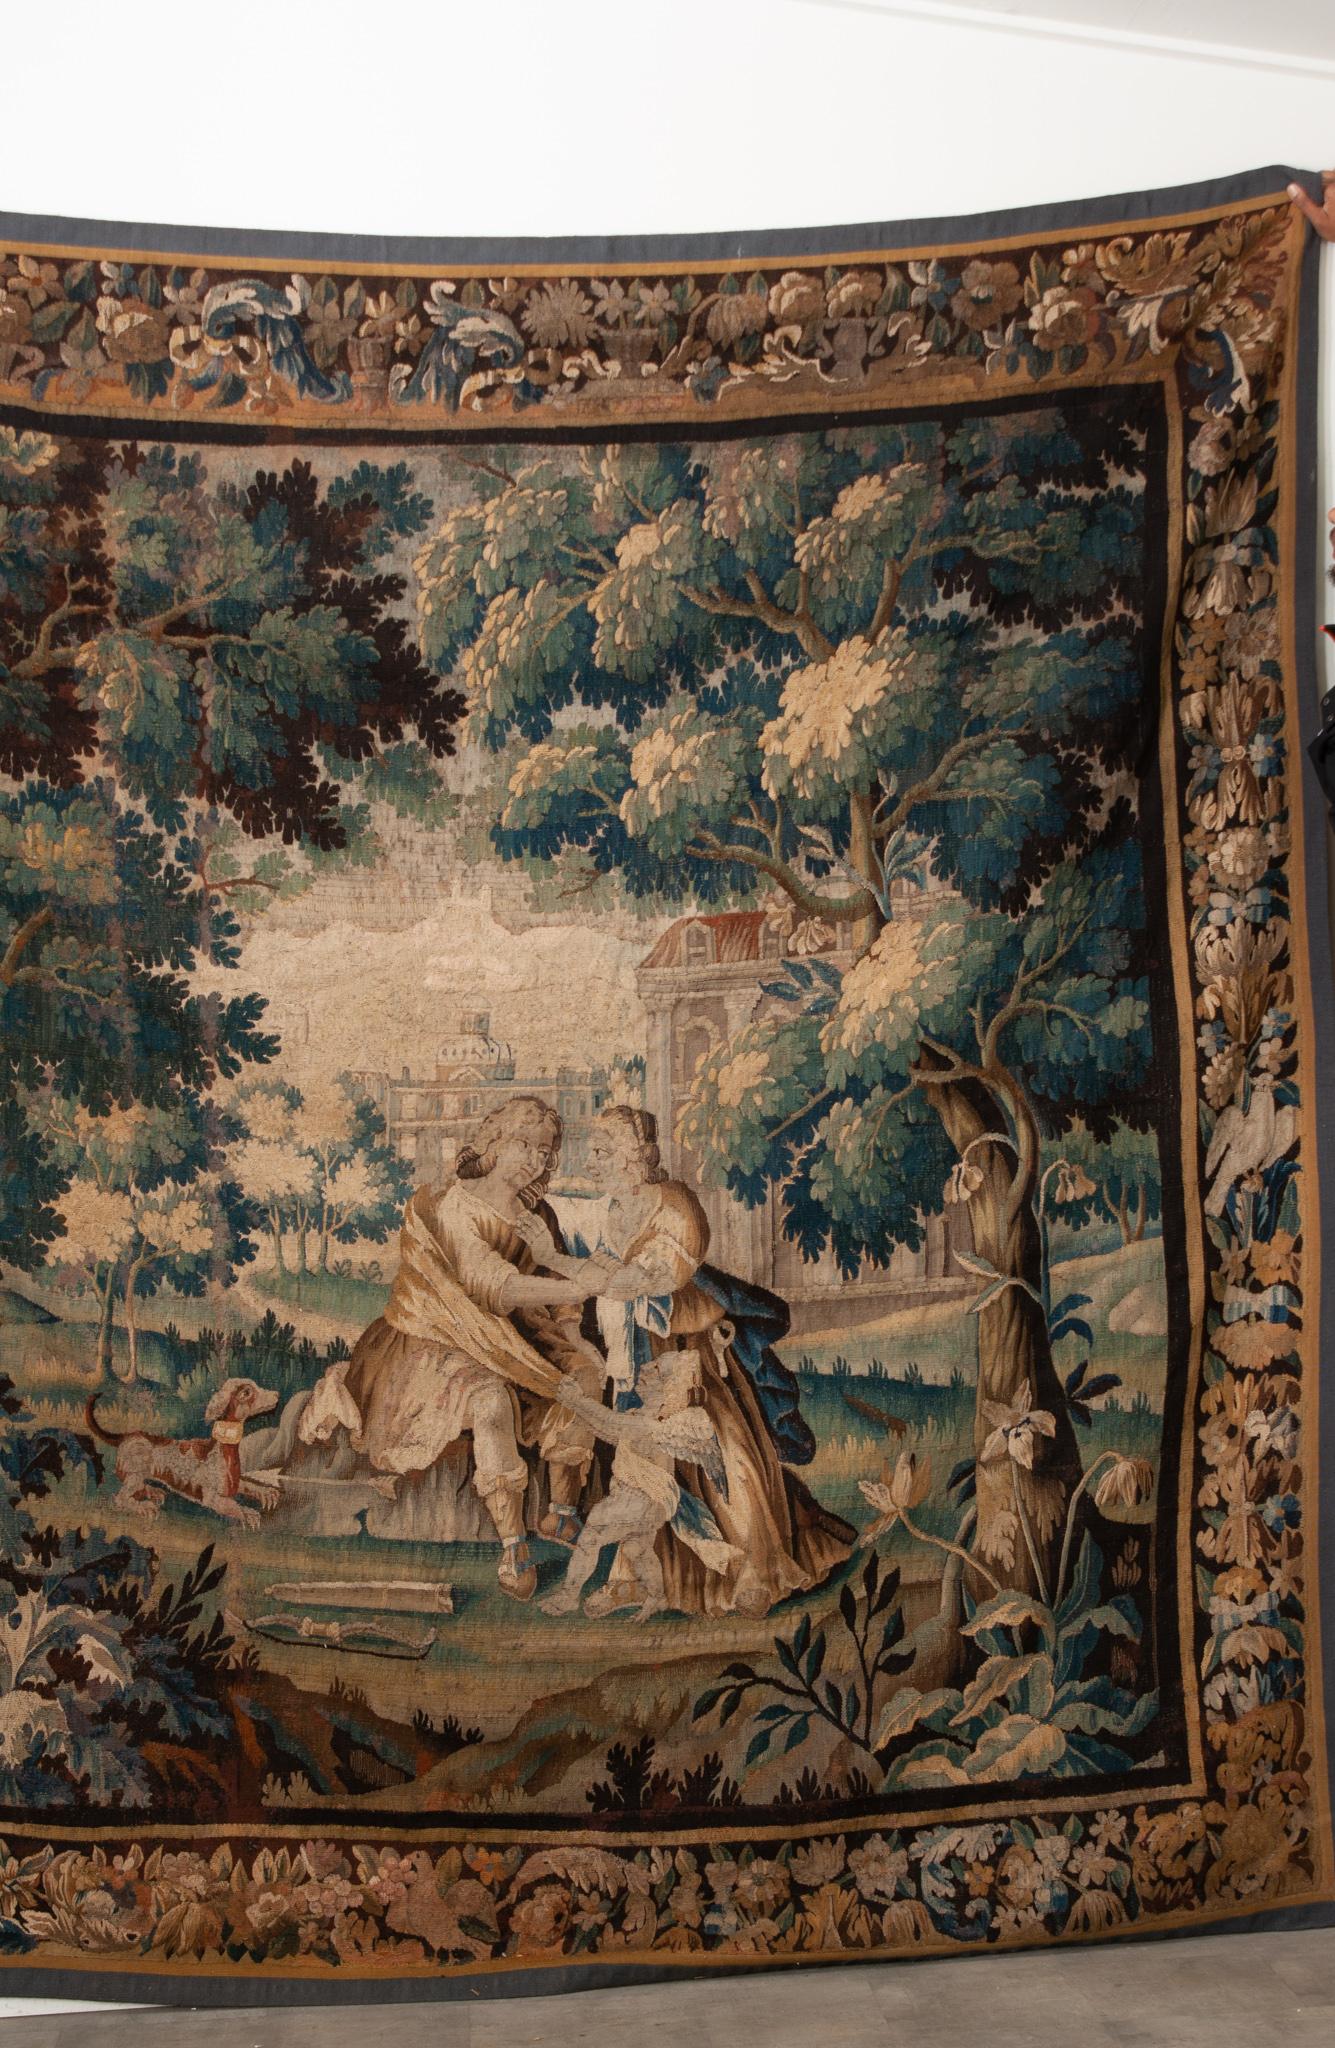 A 16th Century, or earlier, Audubon tapestry is vibrant and in wonderful antique condition. Its original border is completely intact and designed with florals, foliage, and birds. Tapestries were first created in the middle ages to hold in warm in